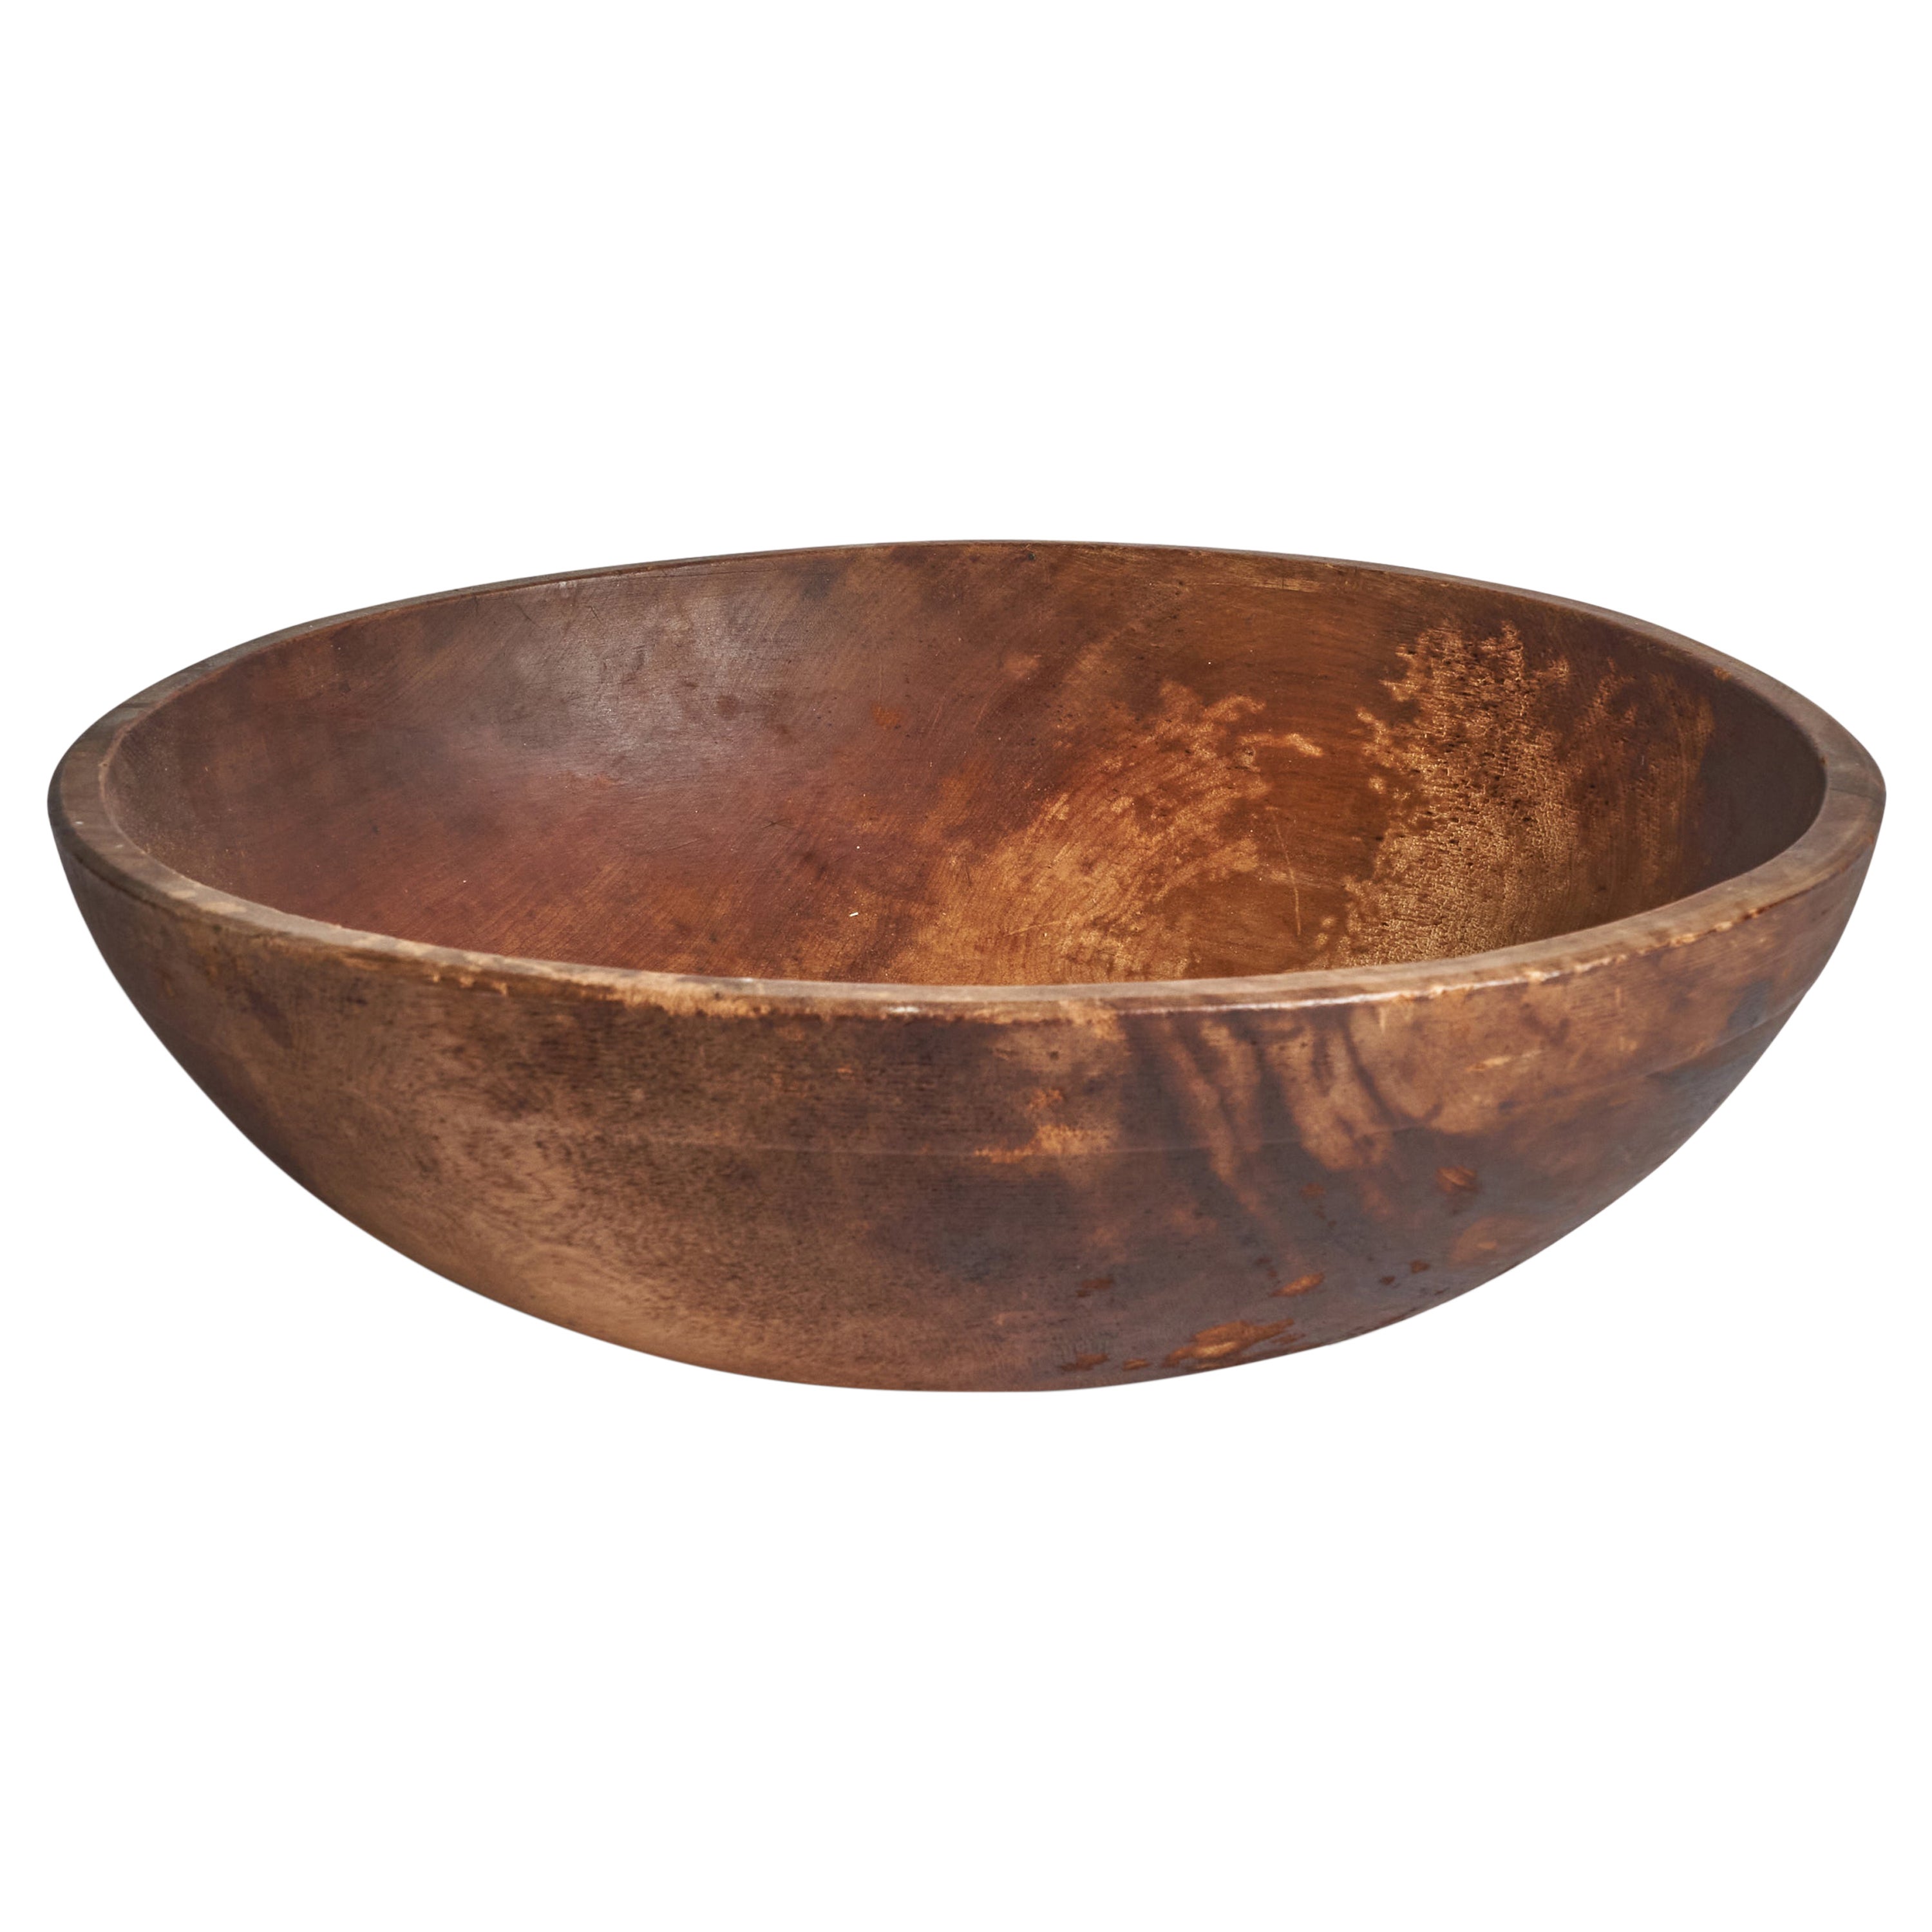 American Craft, Bowl, Wood, USA, c. 1900 For Sale